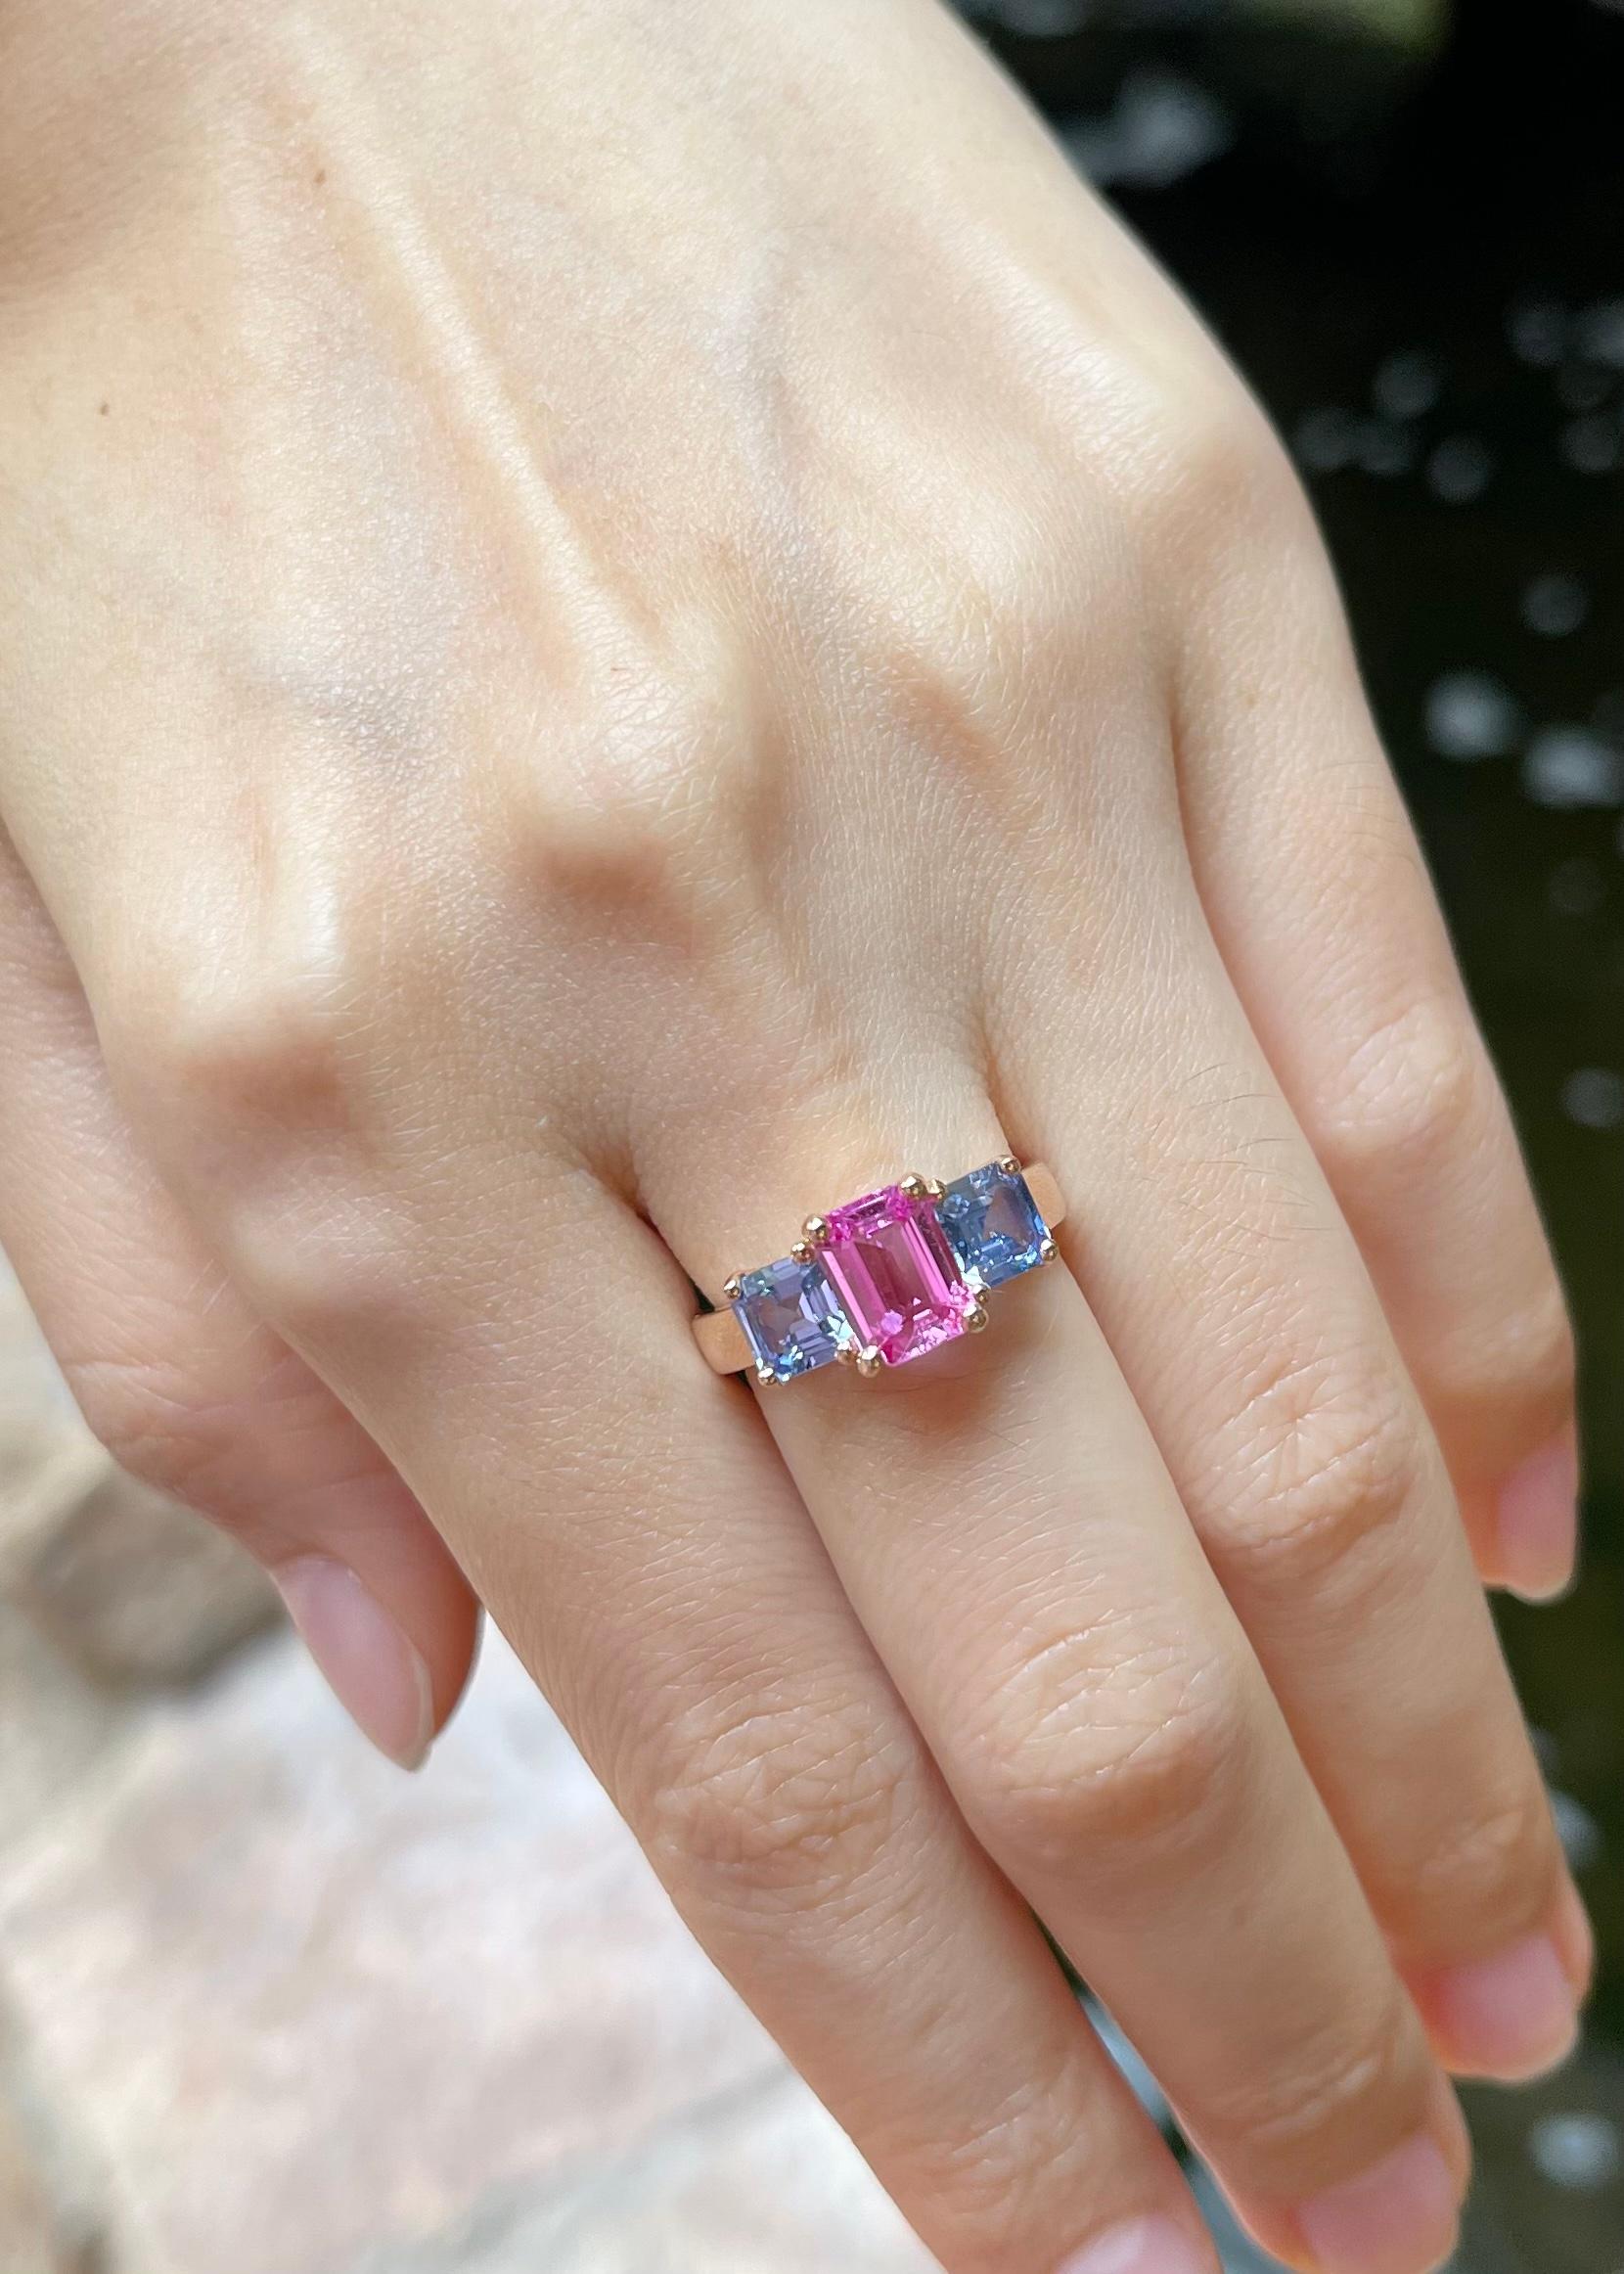 Pink Sapphire 1.44 carats with Blue Sapphire 1.67 carats Ring set in 18K Rose Gold Settings

Width:  1.6 cm 
Length: 0.8 cm
Ring Size: 53
Total Weight: 5.42 grams

